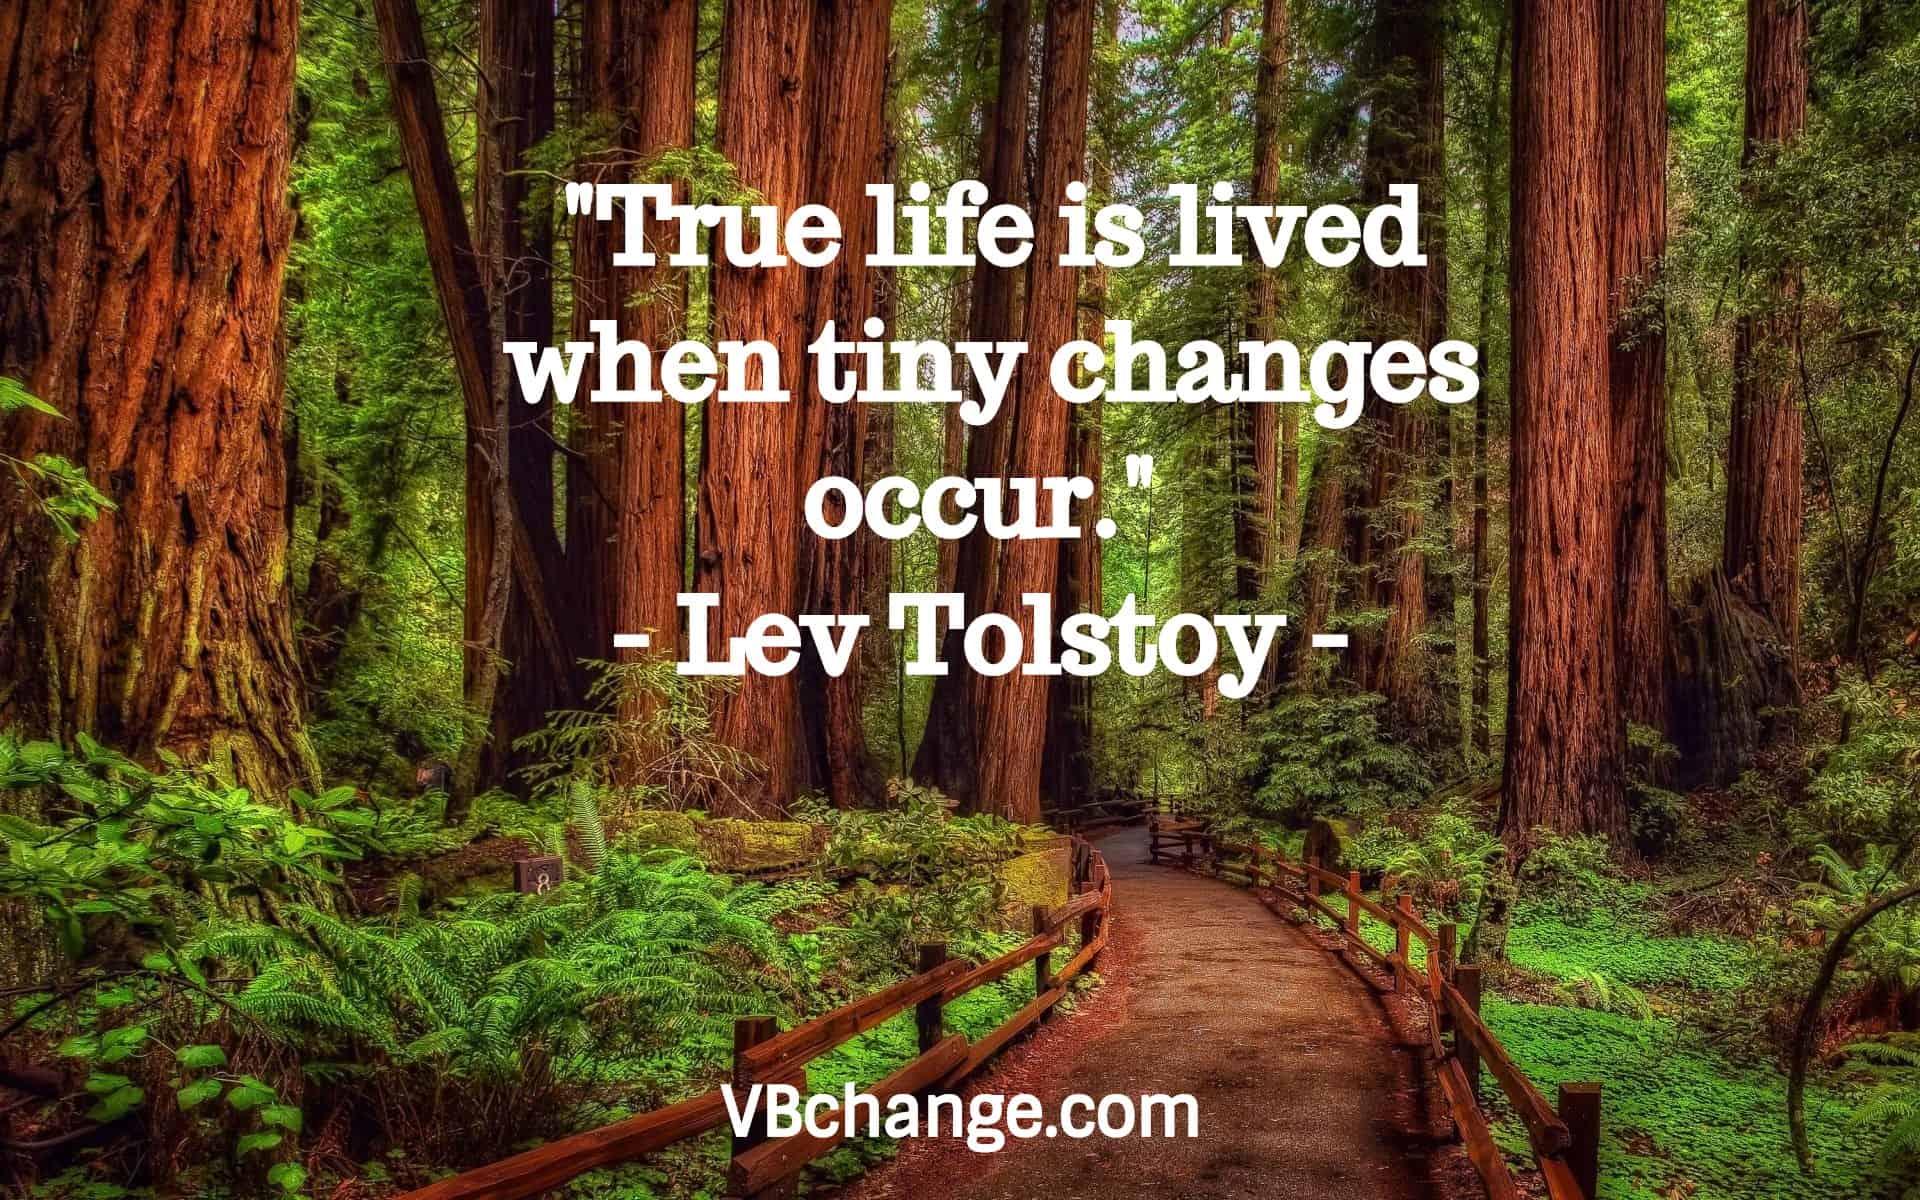 "True life is lived when tiny changes occur." 
